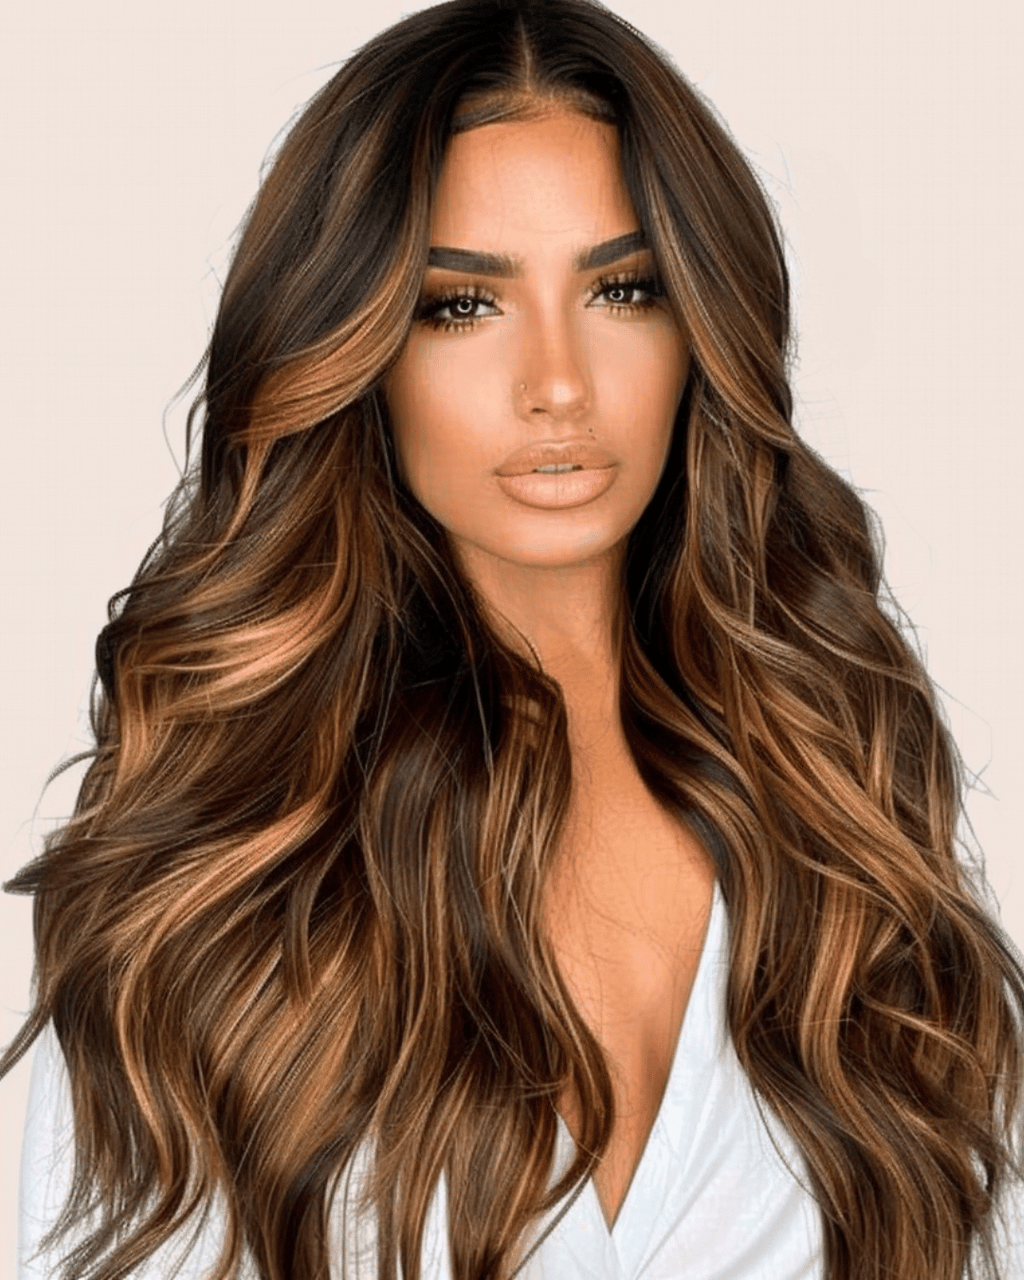 A woman with a full, voluminous hair style showcasing a lace wig named Isabella. The wig has a rich, dark brown root that gradually transitions into a blend of caramel and honey blonde highlights towards the mid-lengths and ends. The hair is styled in soft, flowing waves that create a luxurious and dynamic look, with face-framing layers that start at the chin and add structure to the hairstyle.